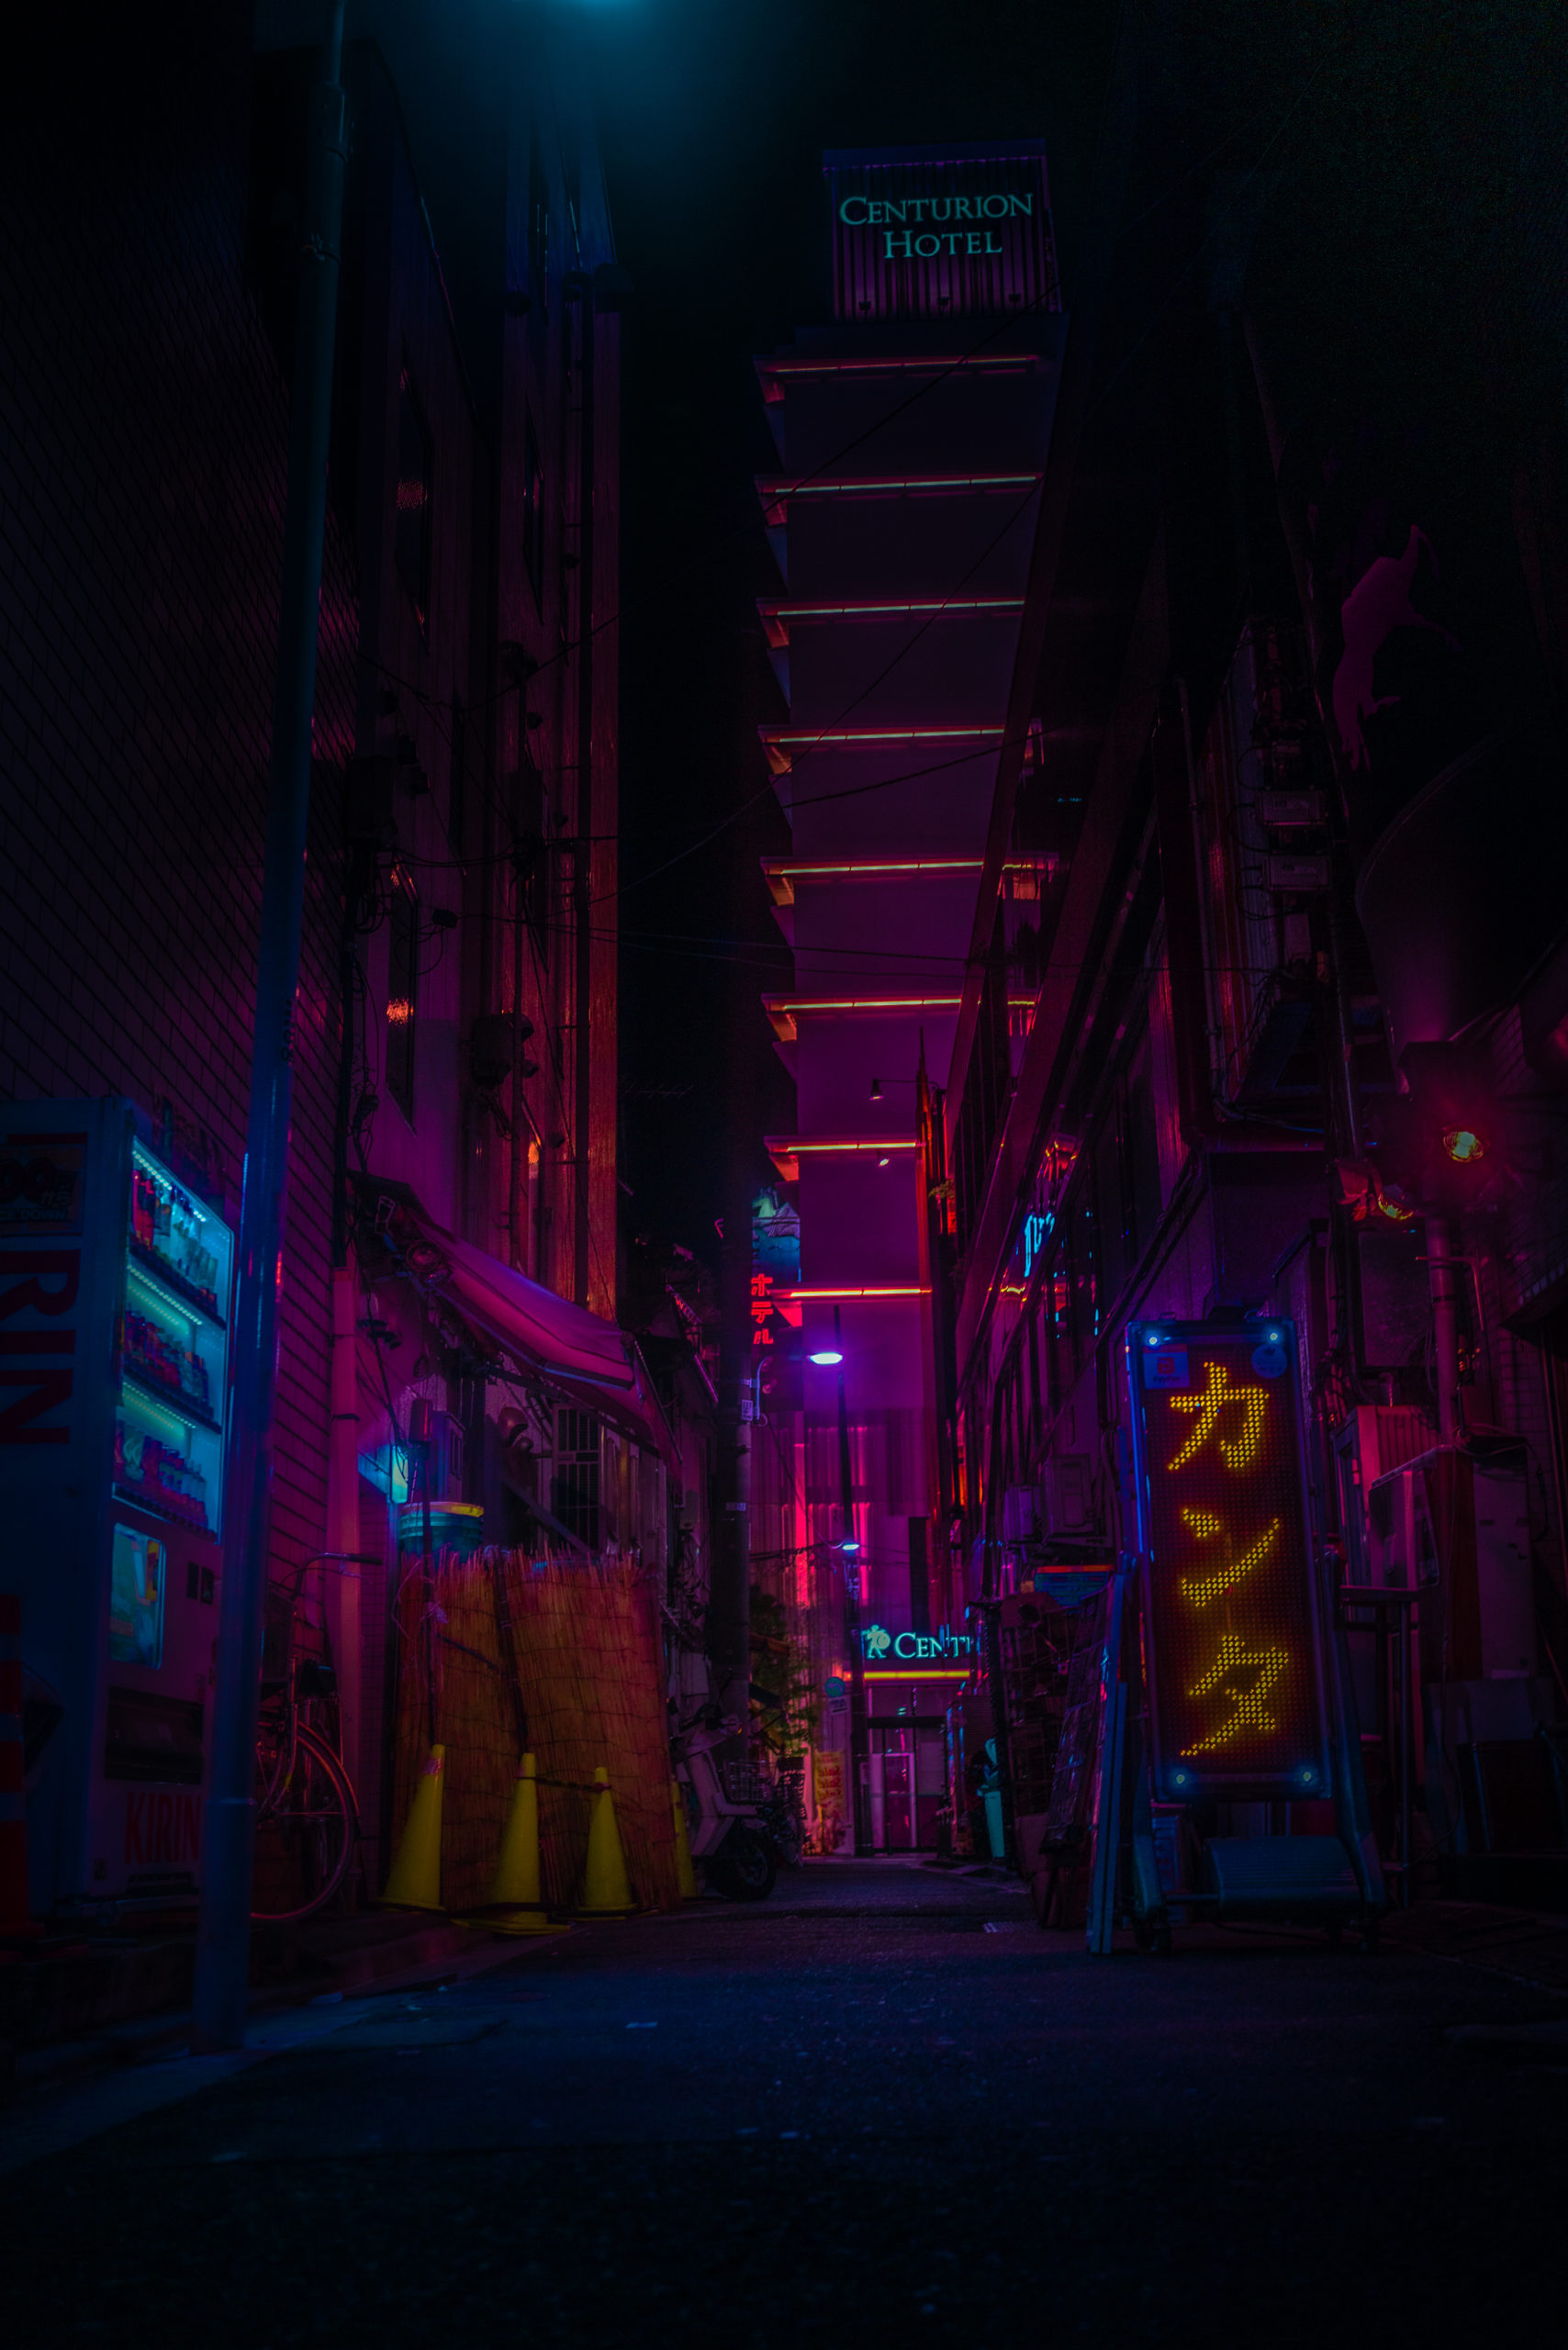 » Photo Gallery : GUILLERMO ALARCON CYBERPUNK PHOTOGRAPHY